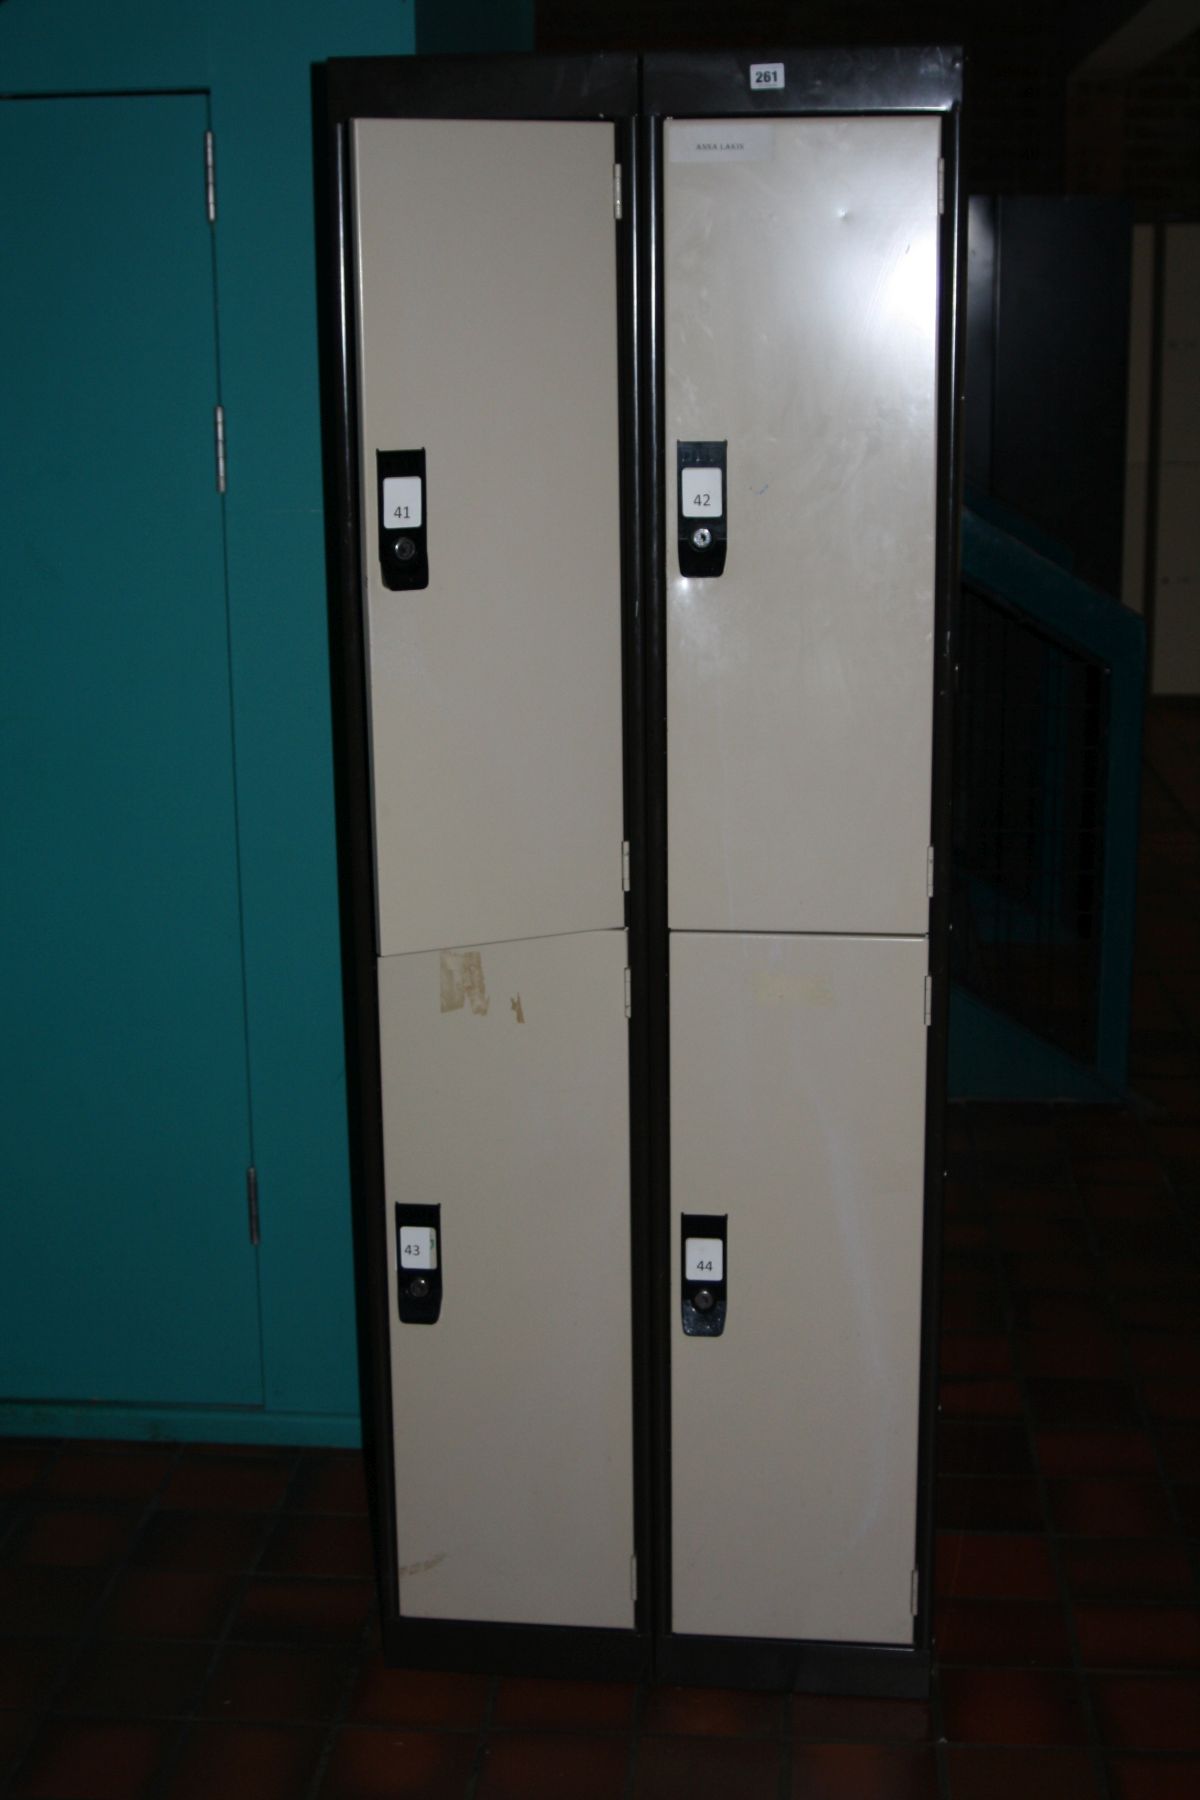 TWO DOUBLE METAL LOCKERS, connected (four lockers), 60x45x170cm (s.d)